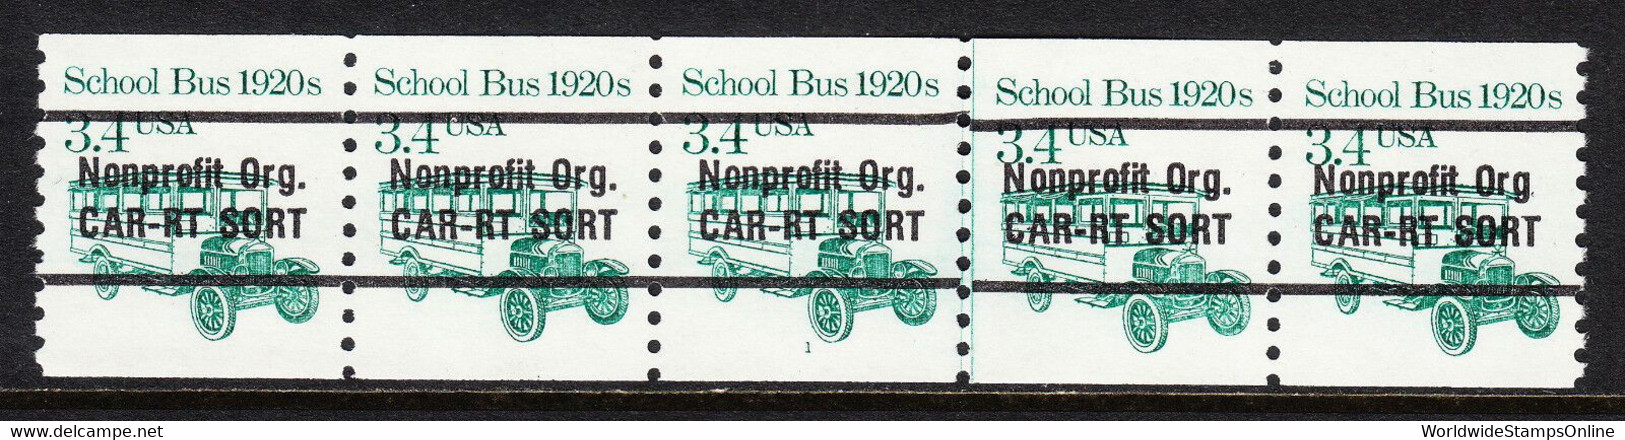 USA — SCOTT 2123a — SCHOOL BUS PC #1 PS5 — LINE GAP — MNH — SCARCE - Coils (Plate Numbers)